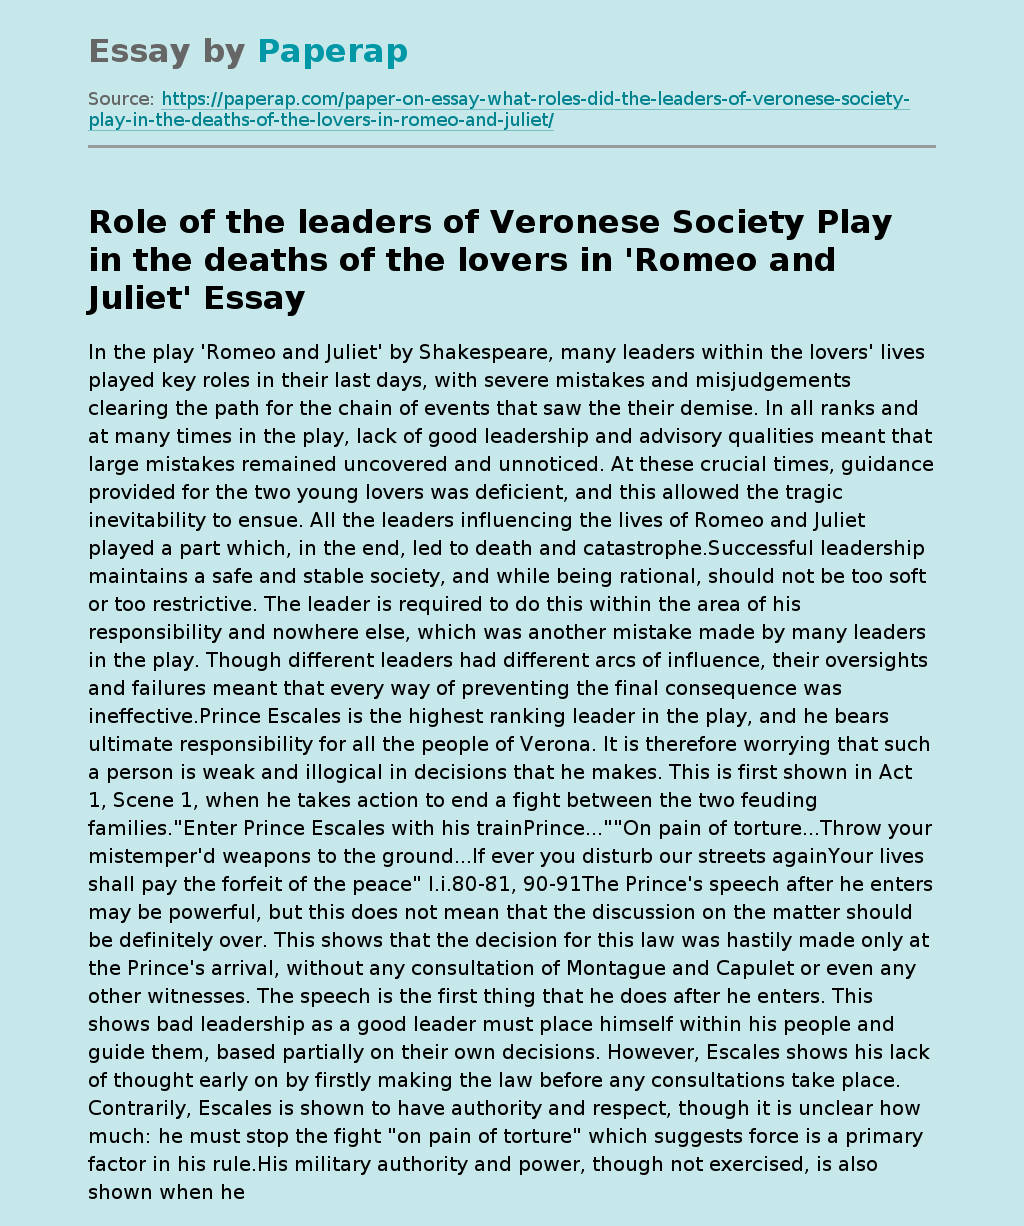 Role of the leaders of Veronese Society Play in the deaths of the lovers in 'Romeo and Juliet'